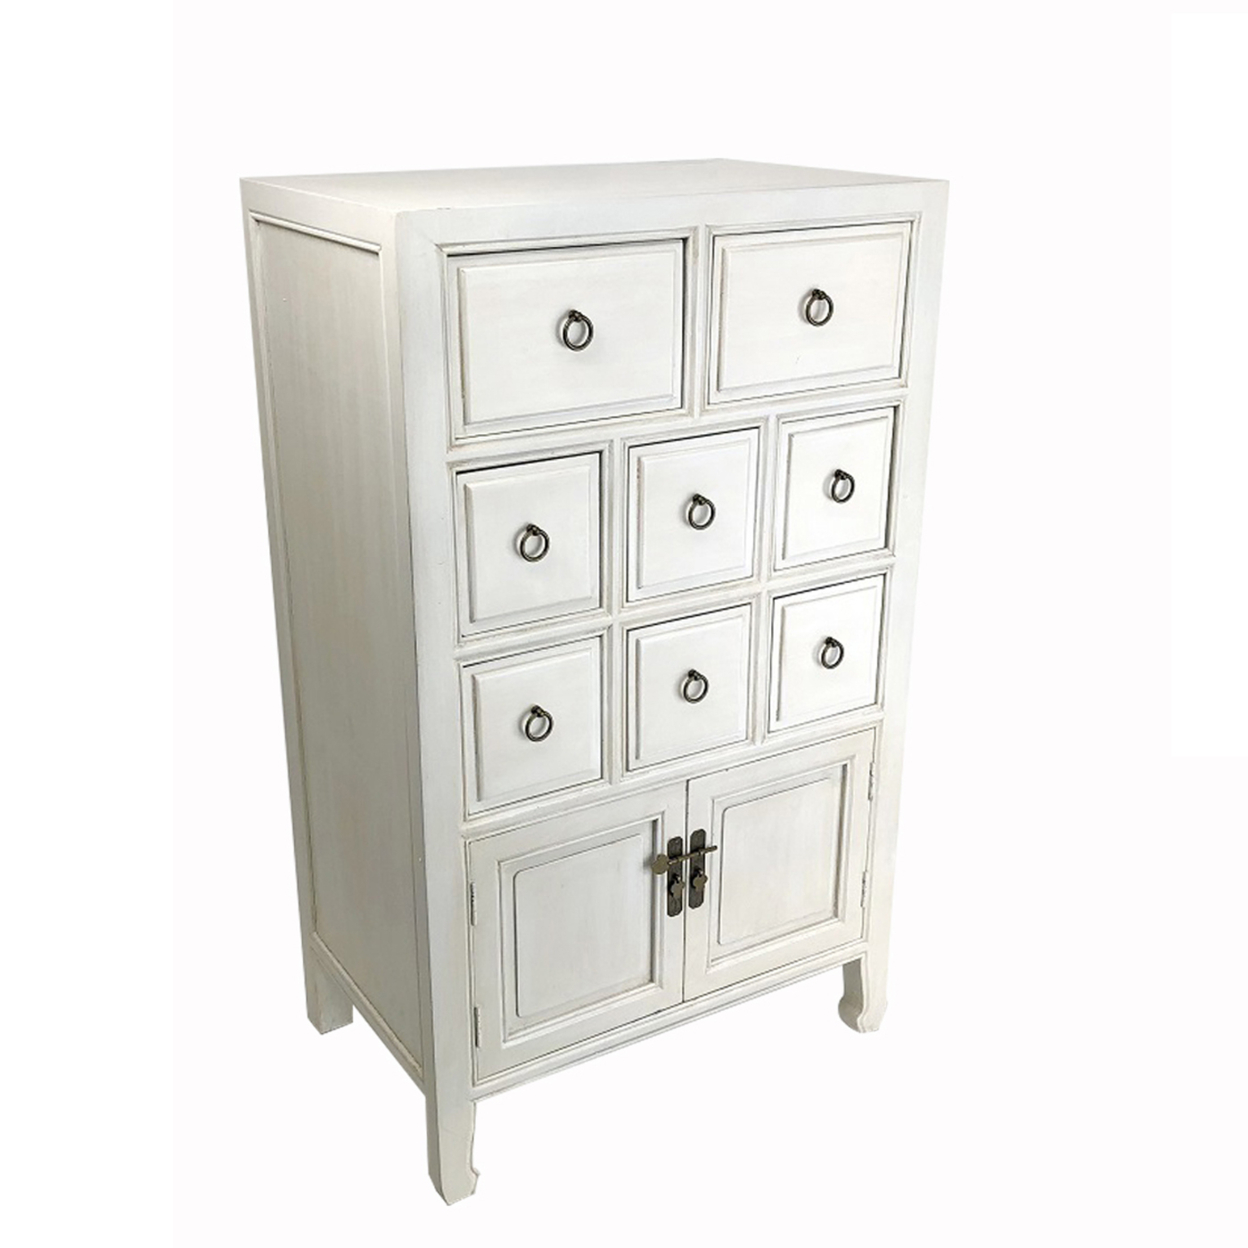 Wooden Chest With 8 Drawers And 2 Door Cabinets, White- Saltoro Sherpi